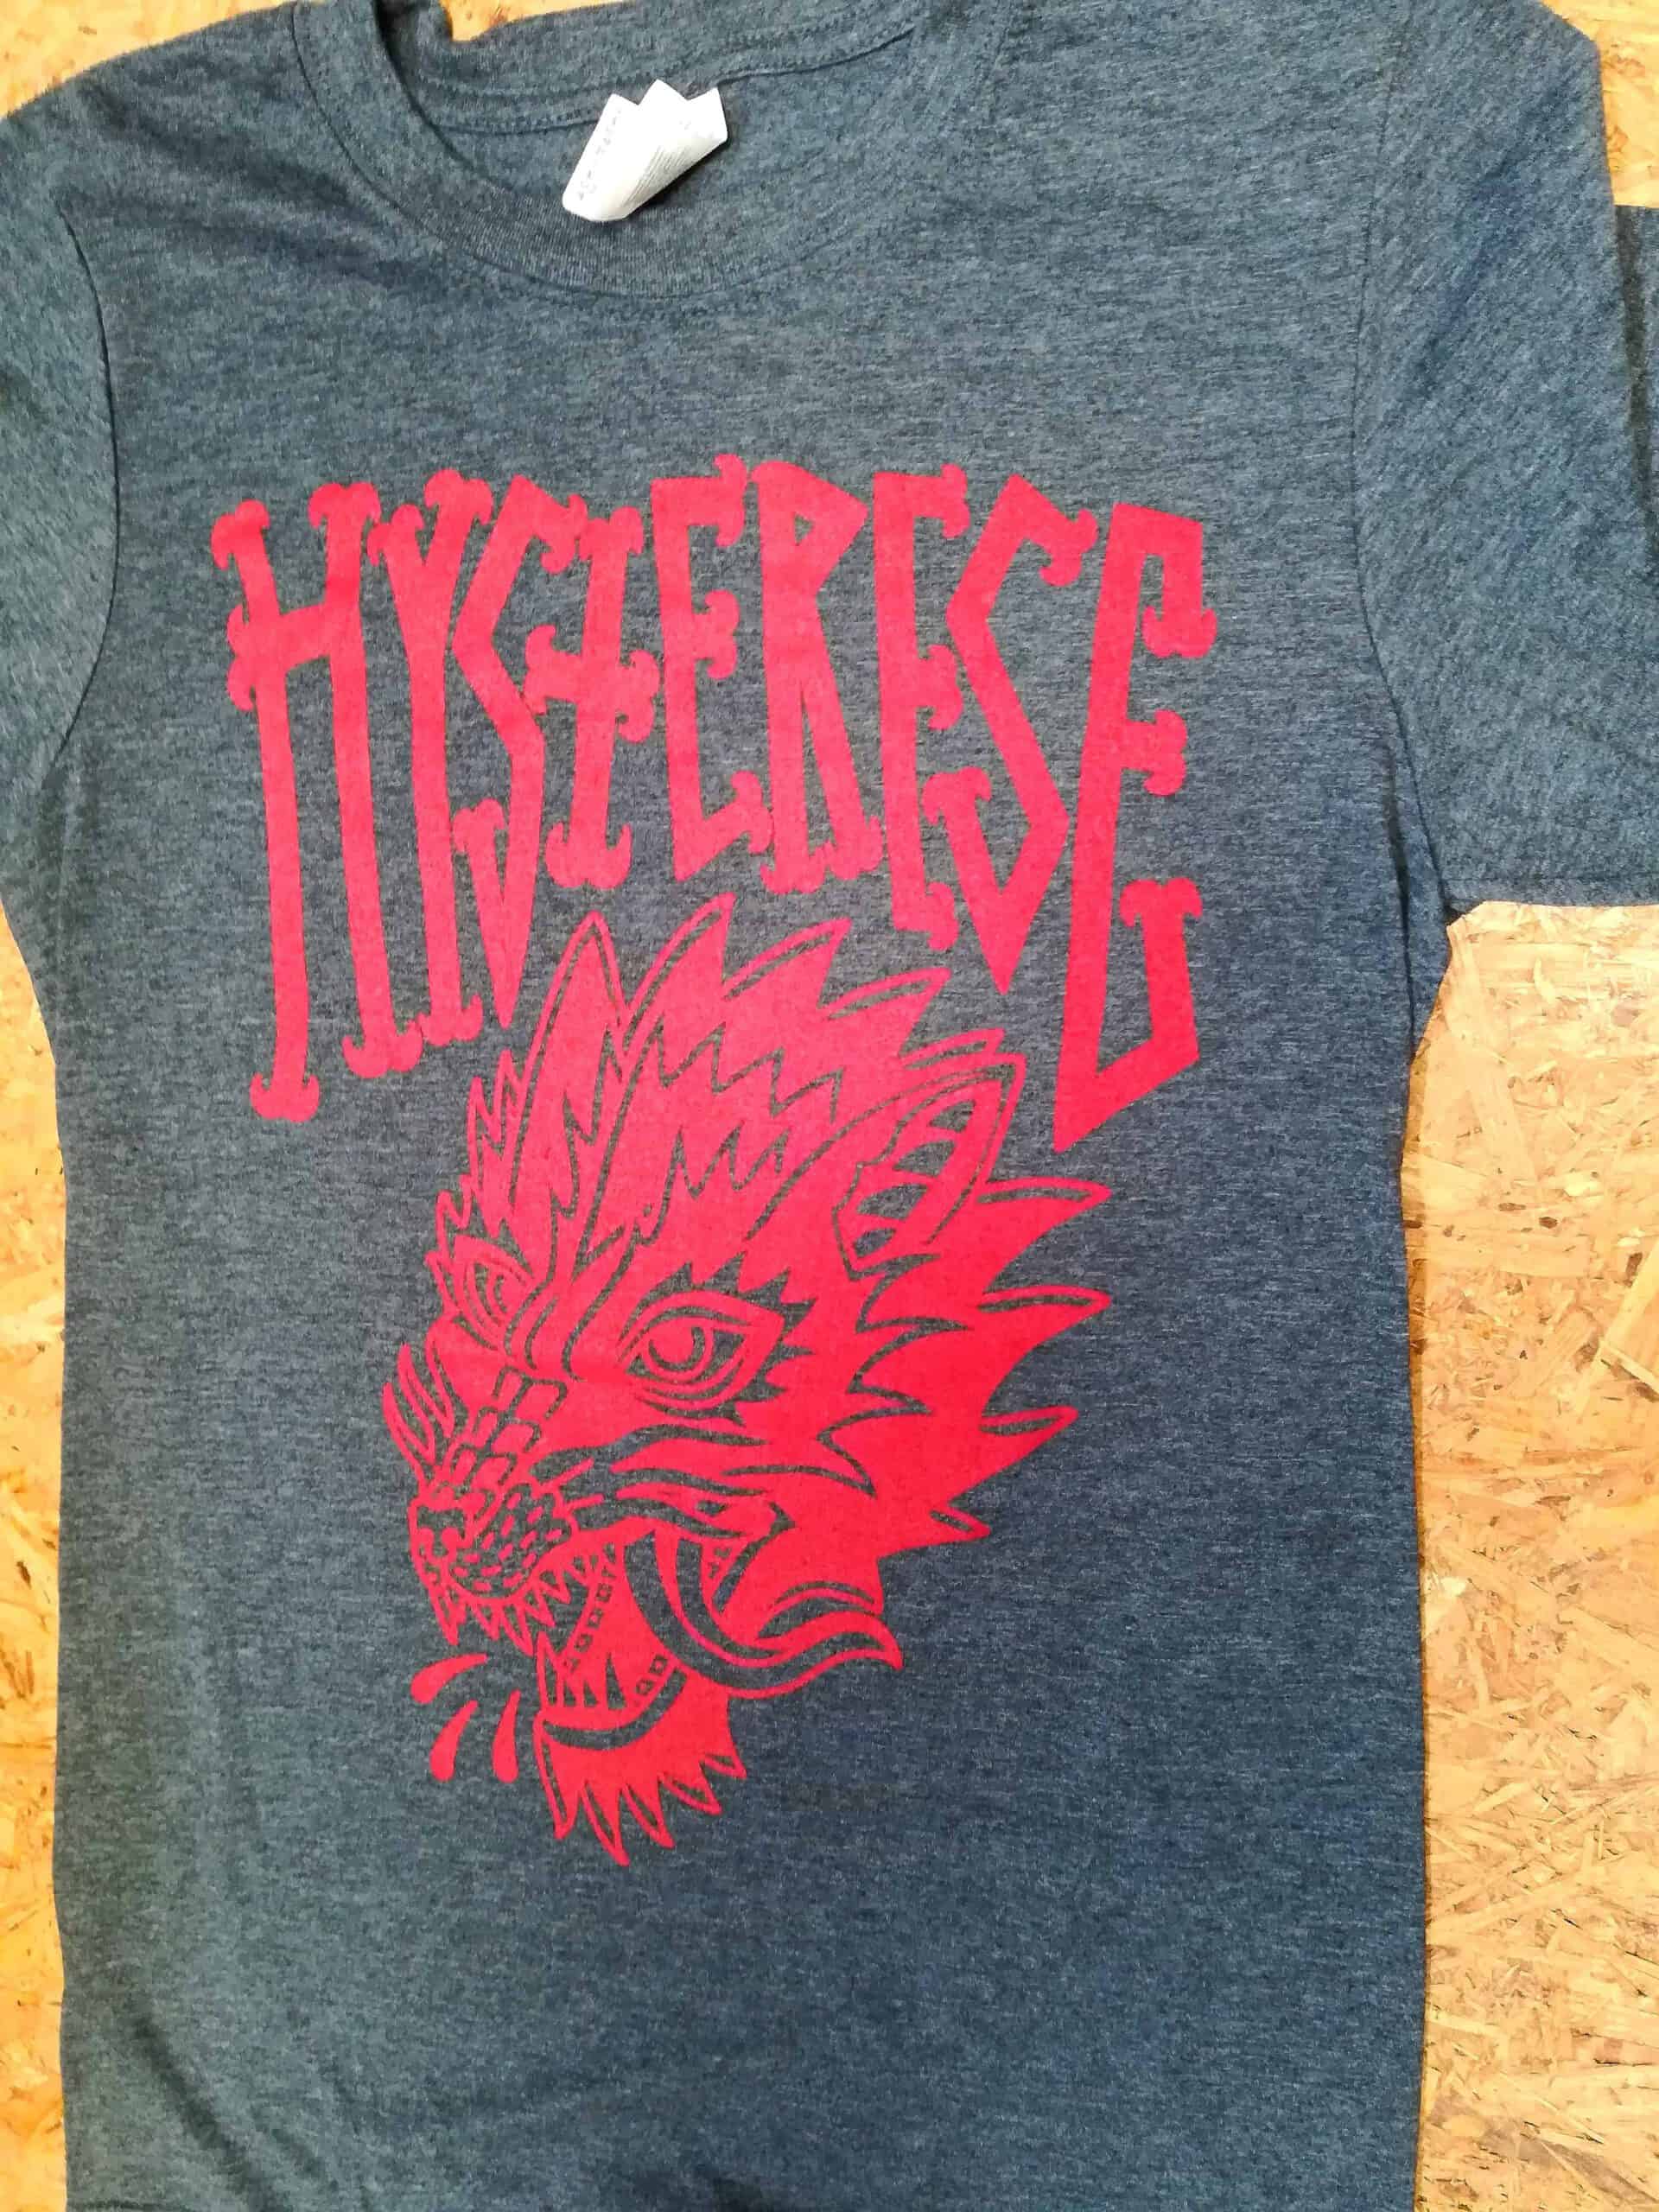 Hysterese - Wolf Shirt Exclusives HYSTERESE Shirt bei This Charming Man Records! 25 Stück made